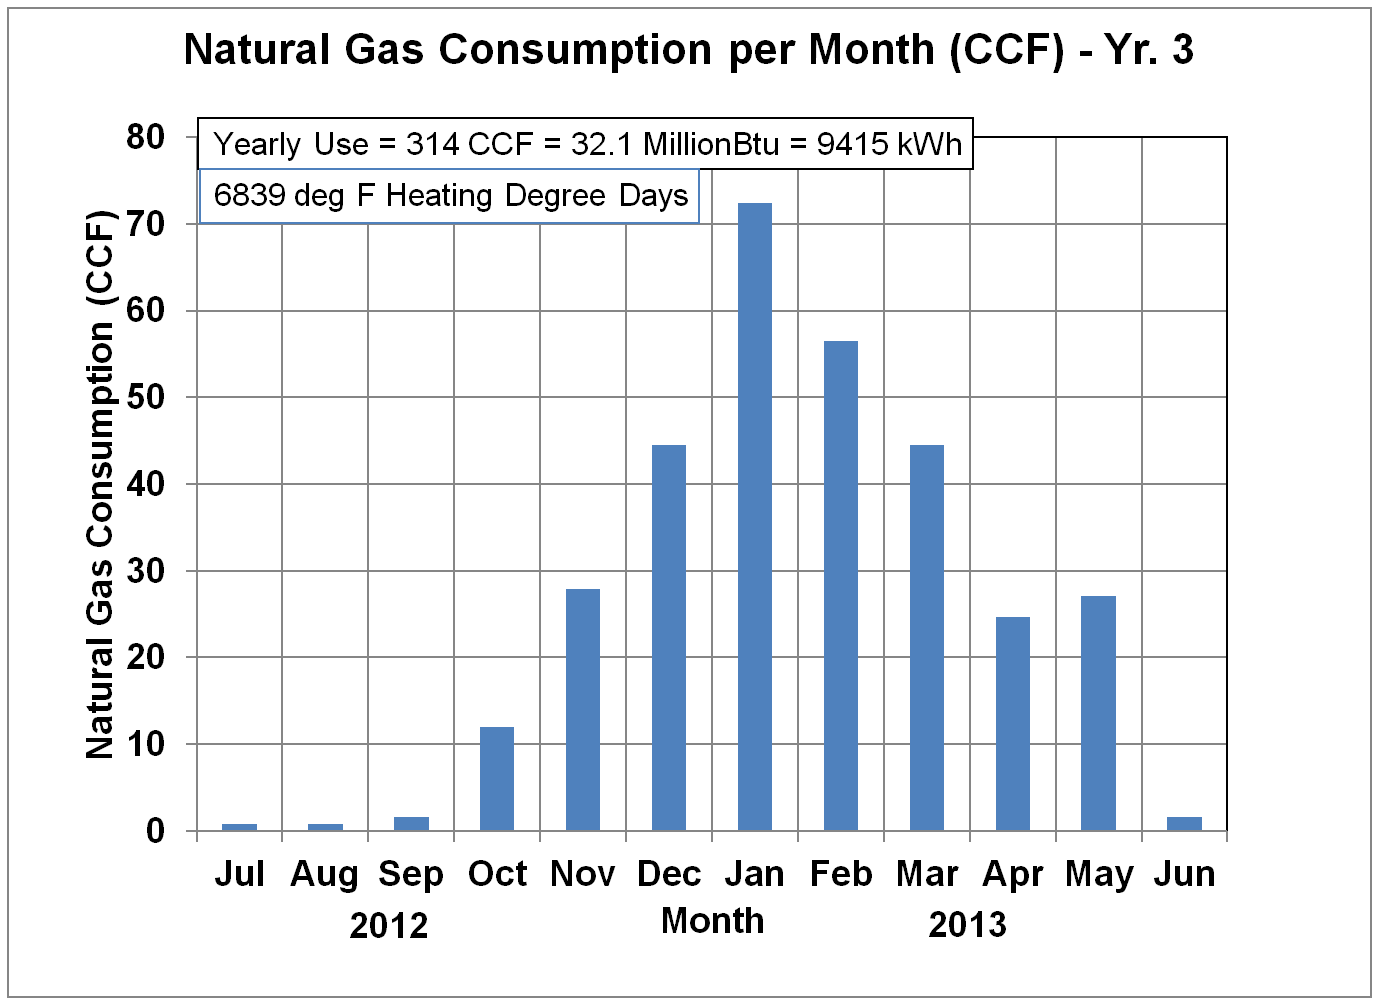 Natural Gas Usage in CCF - Yr. 3